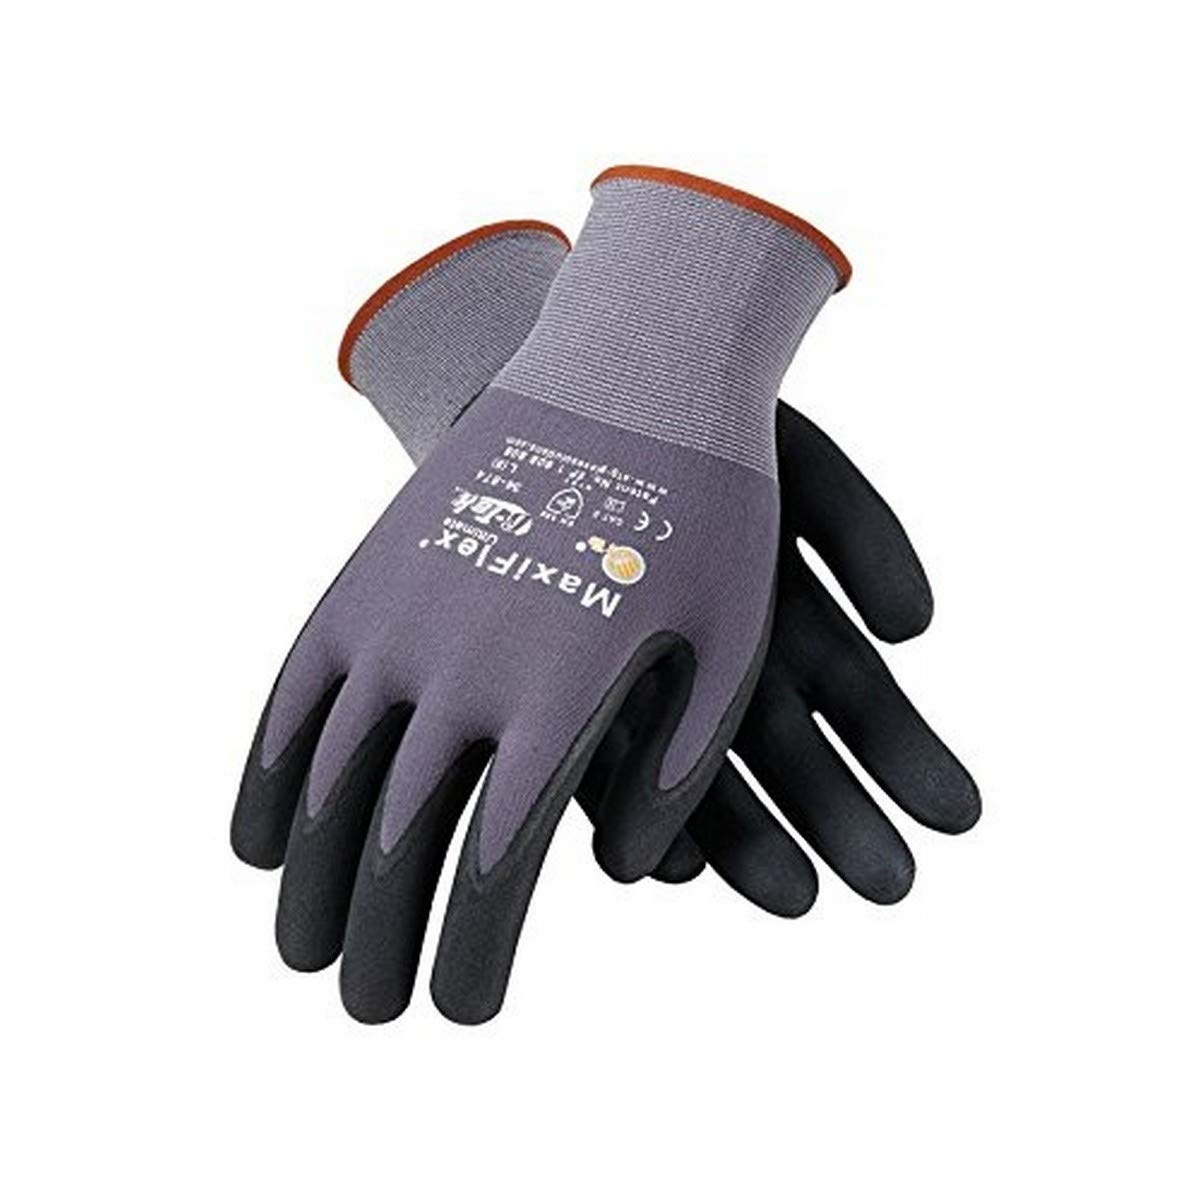 PIP 34-874/XS Maxi Flex Ultimate 34874 Foam Nitrile Palm Coated Gloves, Gray, XS (Pack of 12)